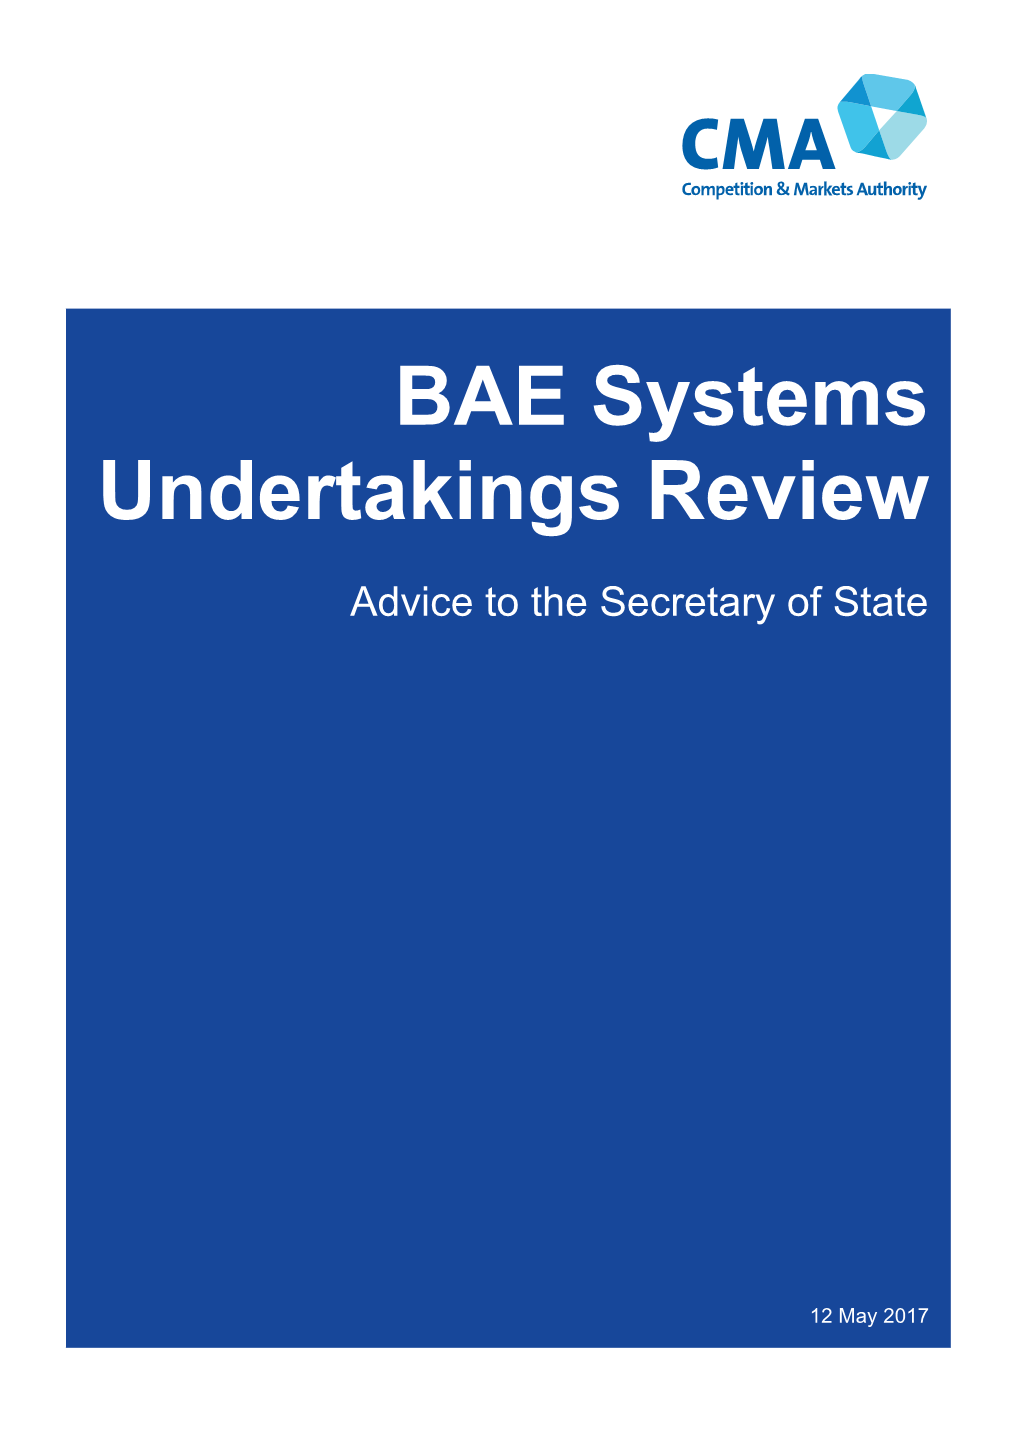 BAE Systems Undertakings Review: Advice to the Secretary of State